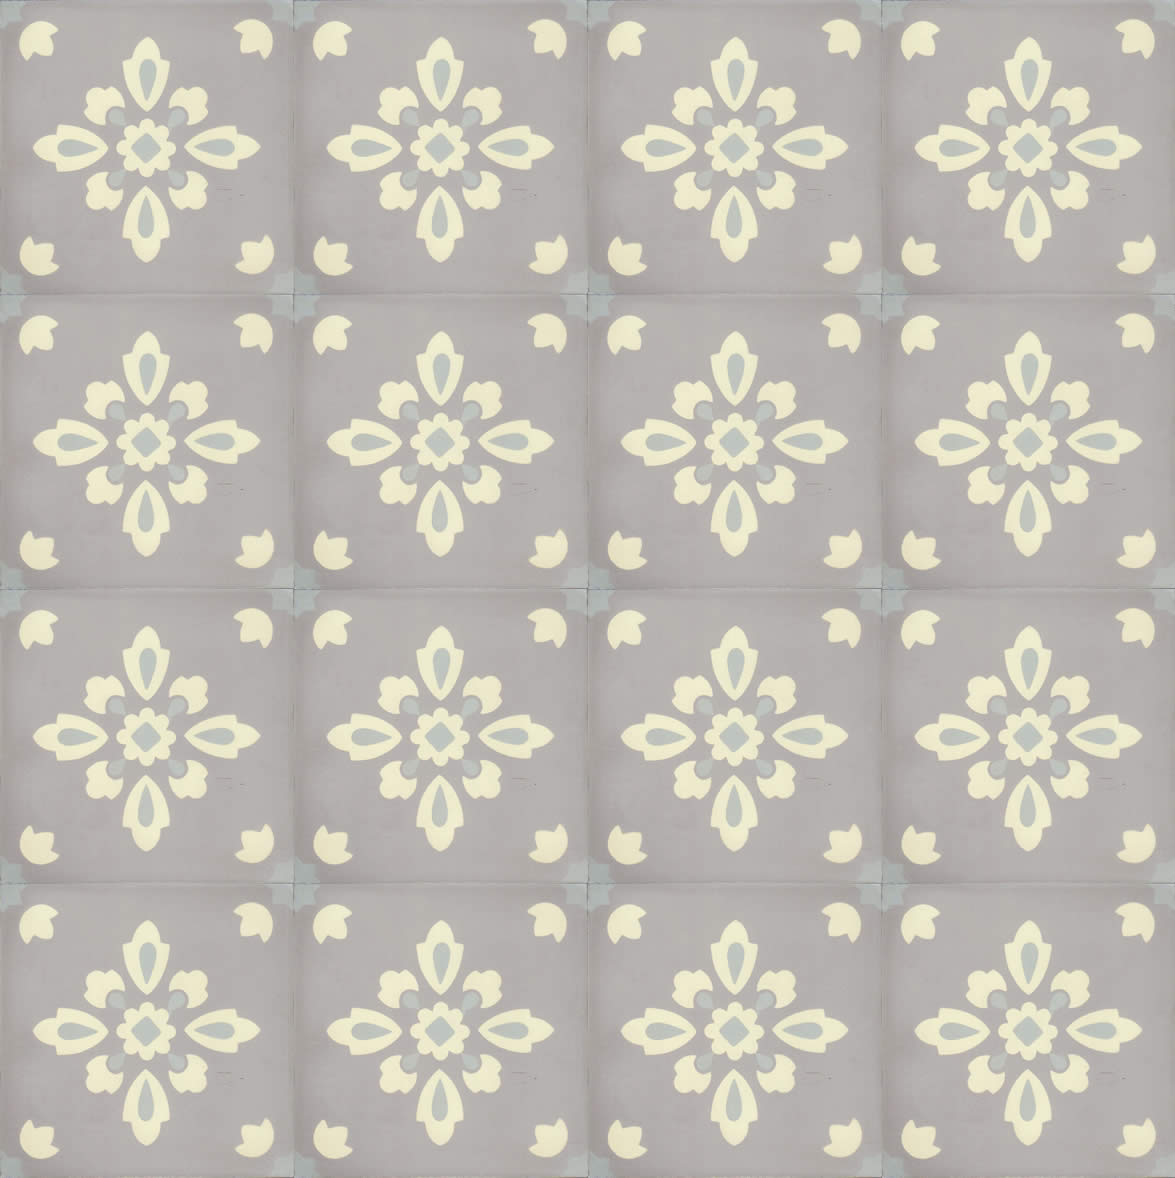 Moroccan Encaustic Cement Pattern gr08, 20 x 20cm - Tiles &amp; Stone To You